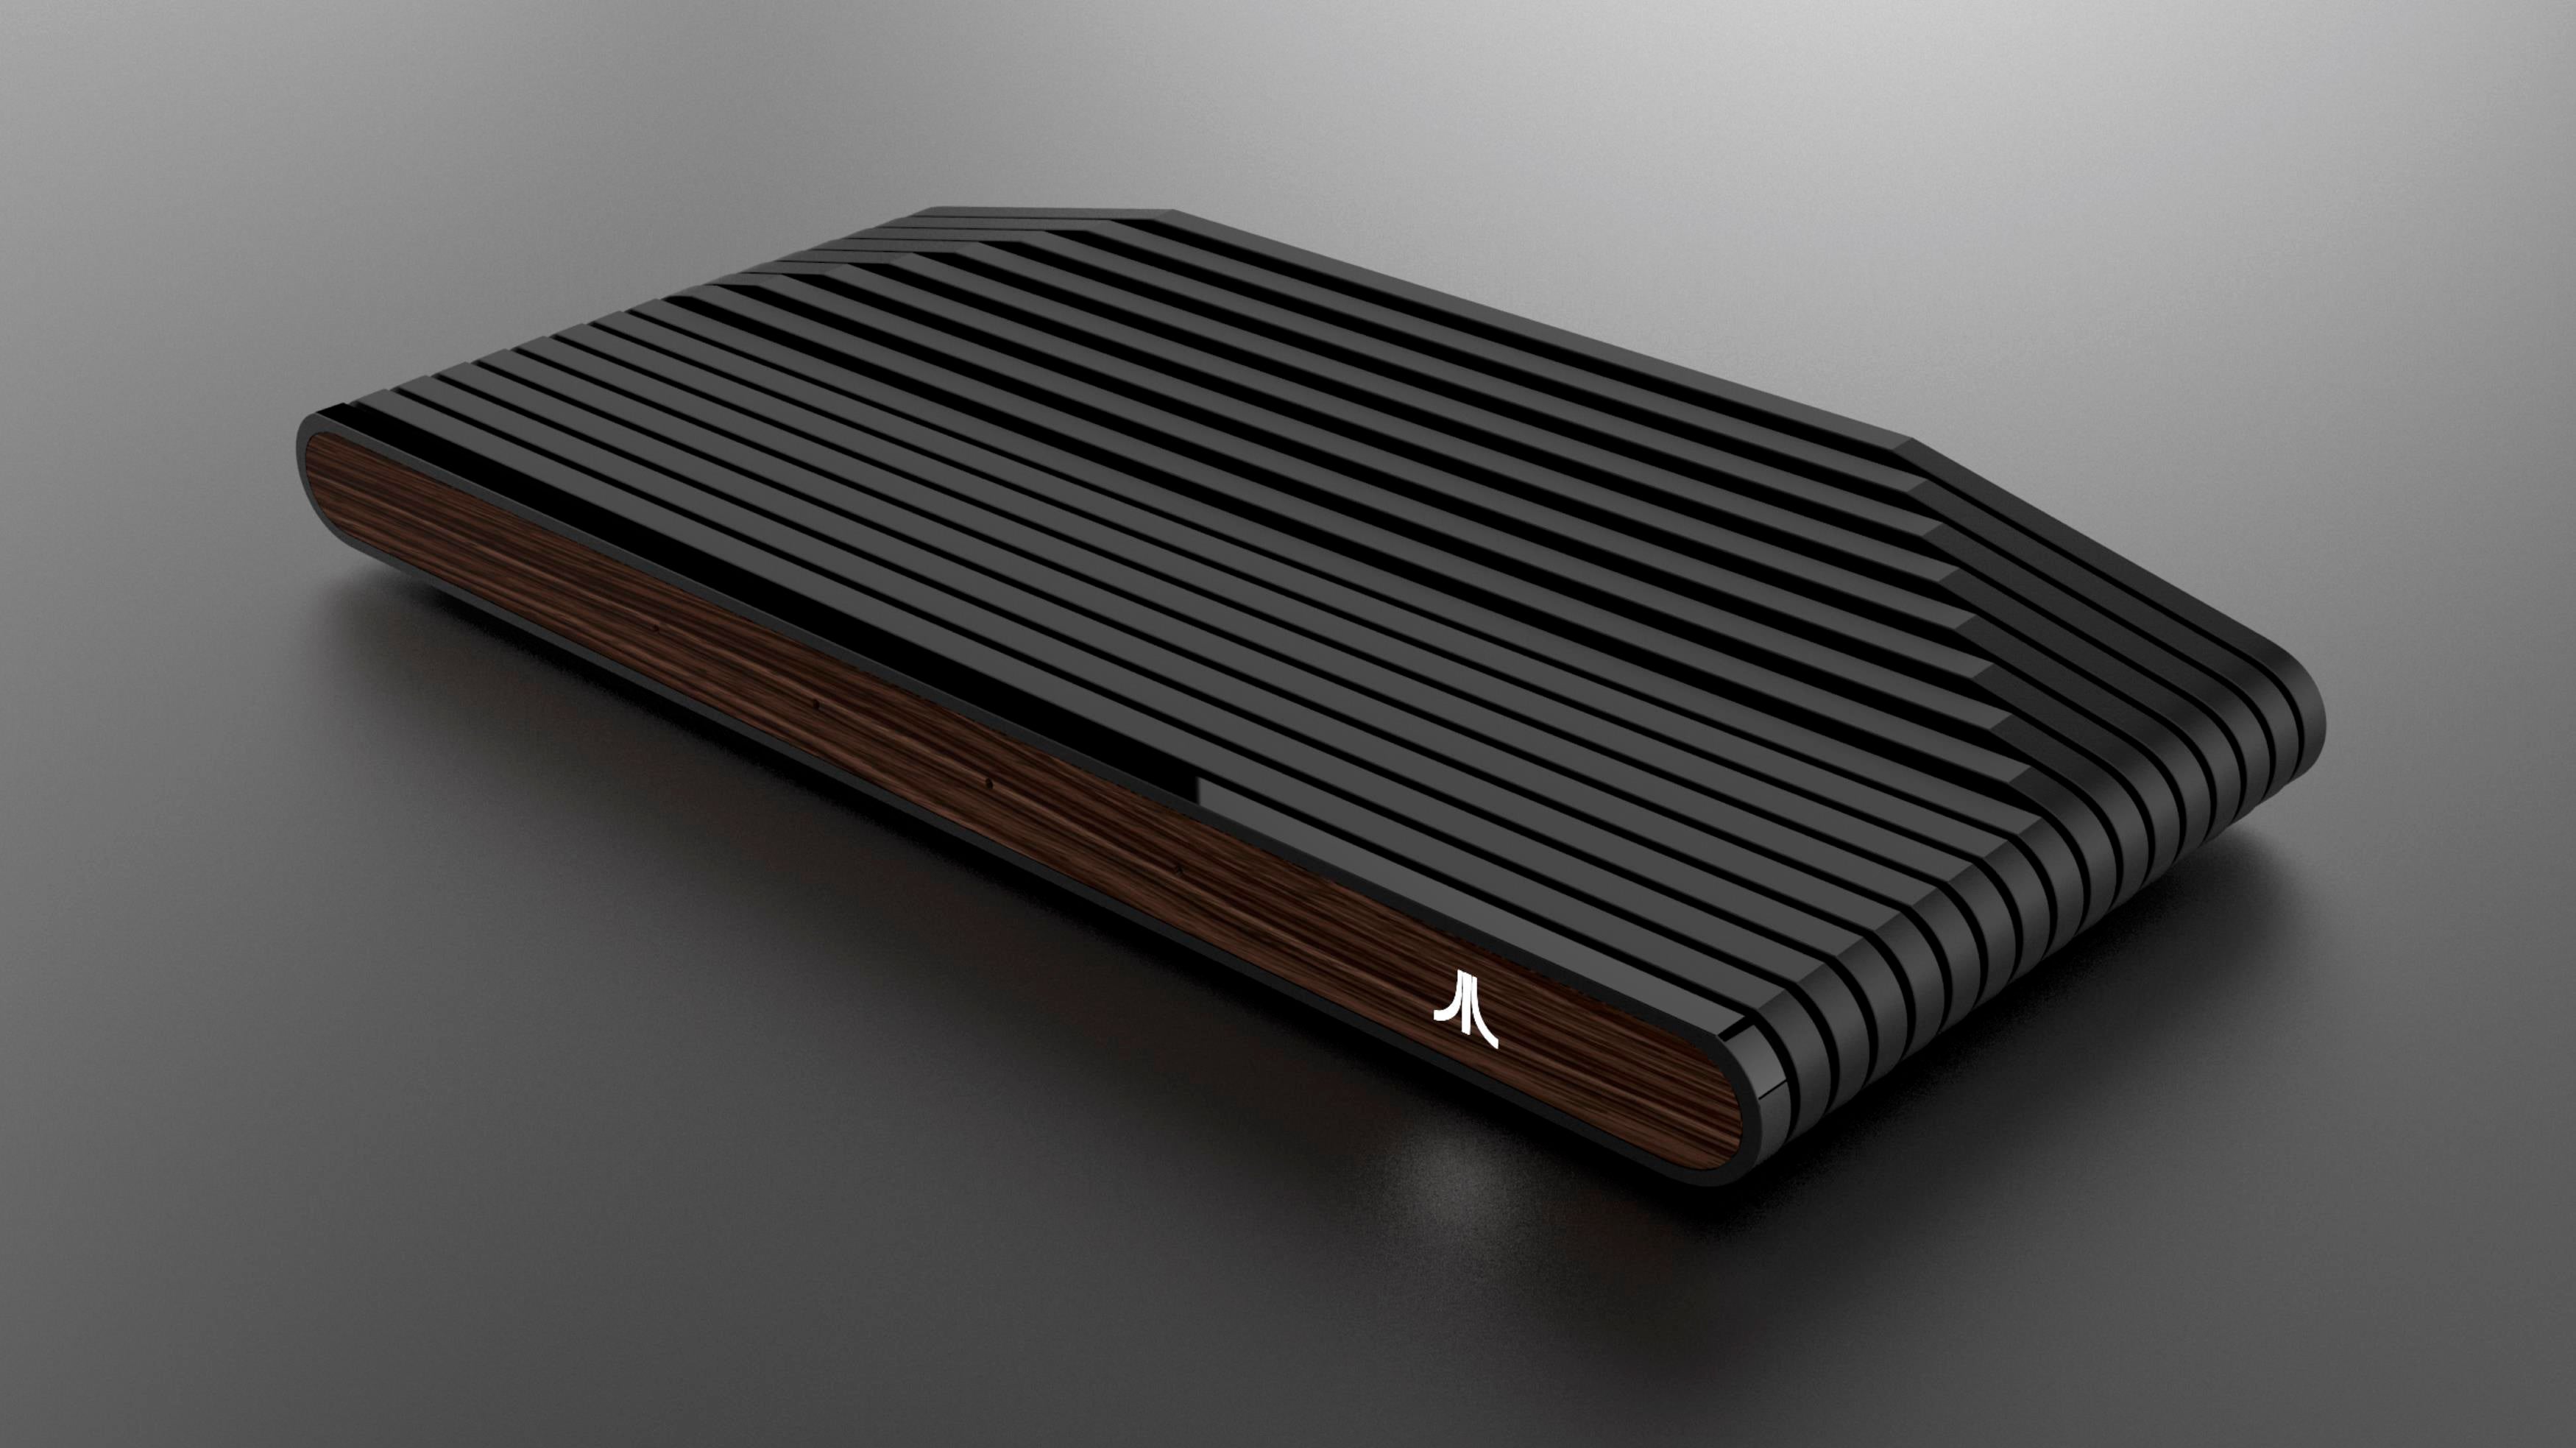 Image for New Atari console, the Ataribox, will include "current gaming content" as well as classics